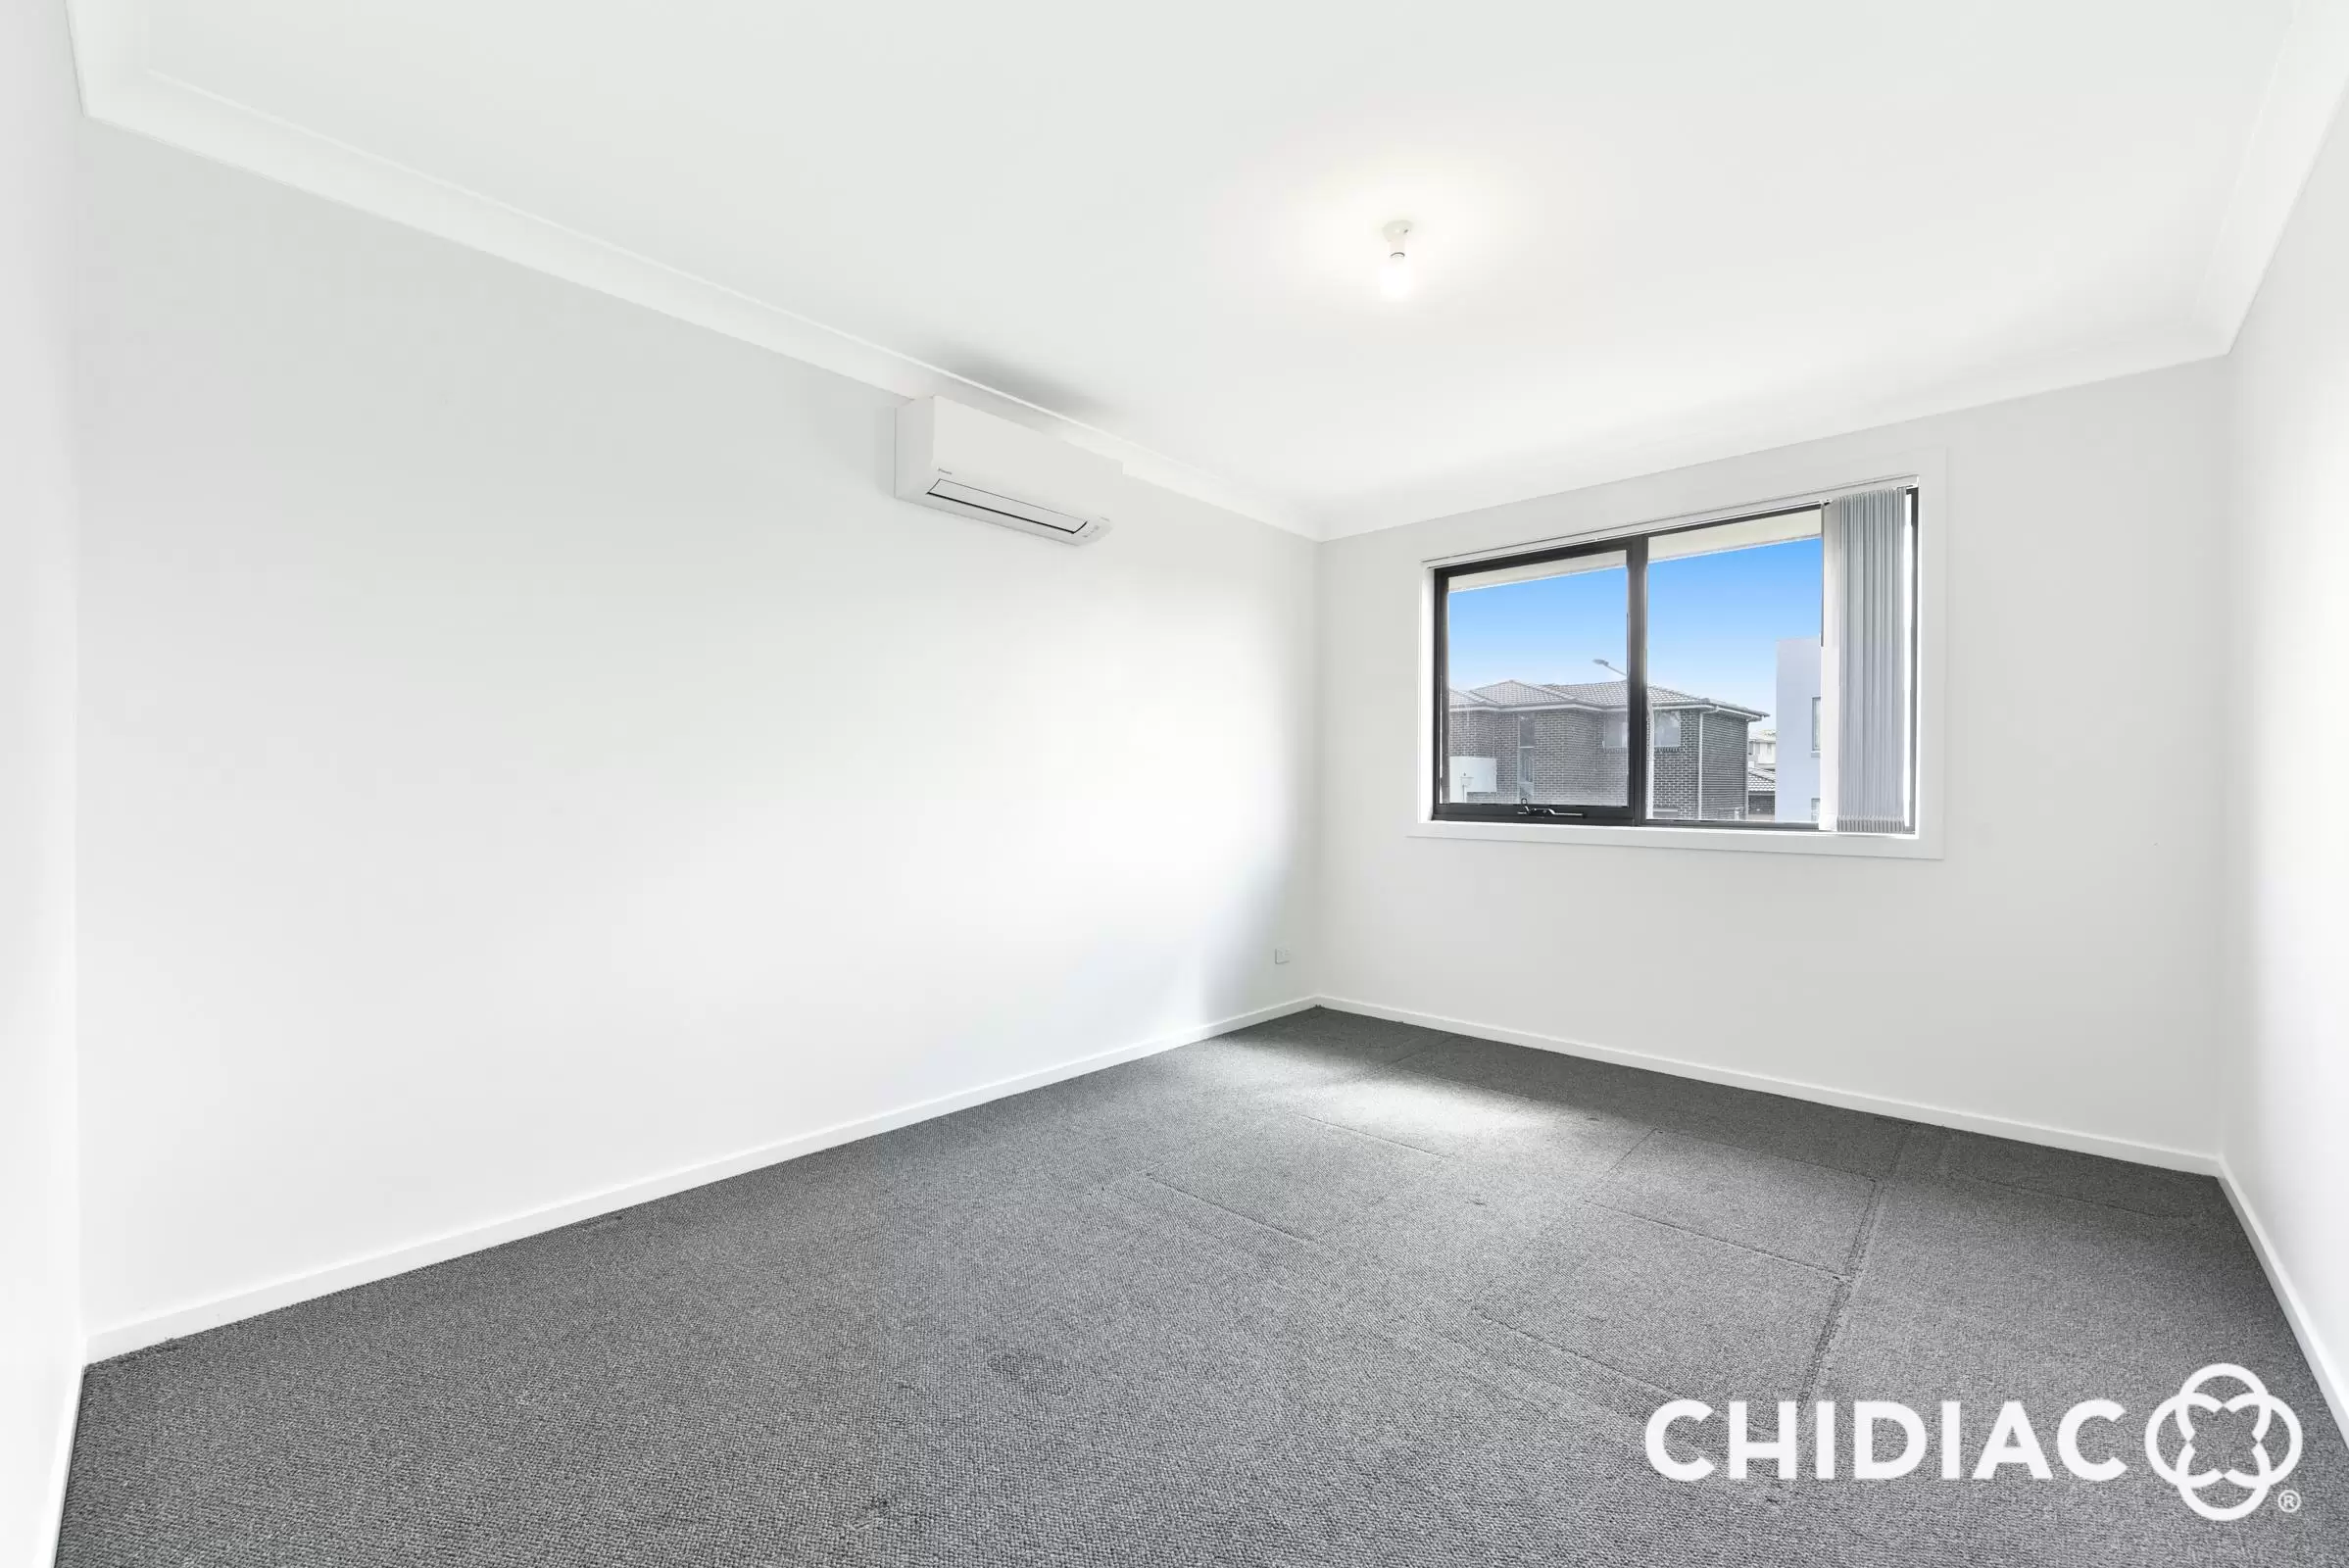 33 Changsha Road, Edmondson Park Leased by Chidiac Realty - image 4